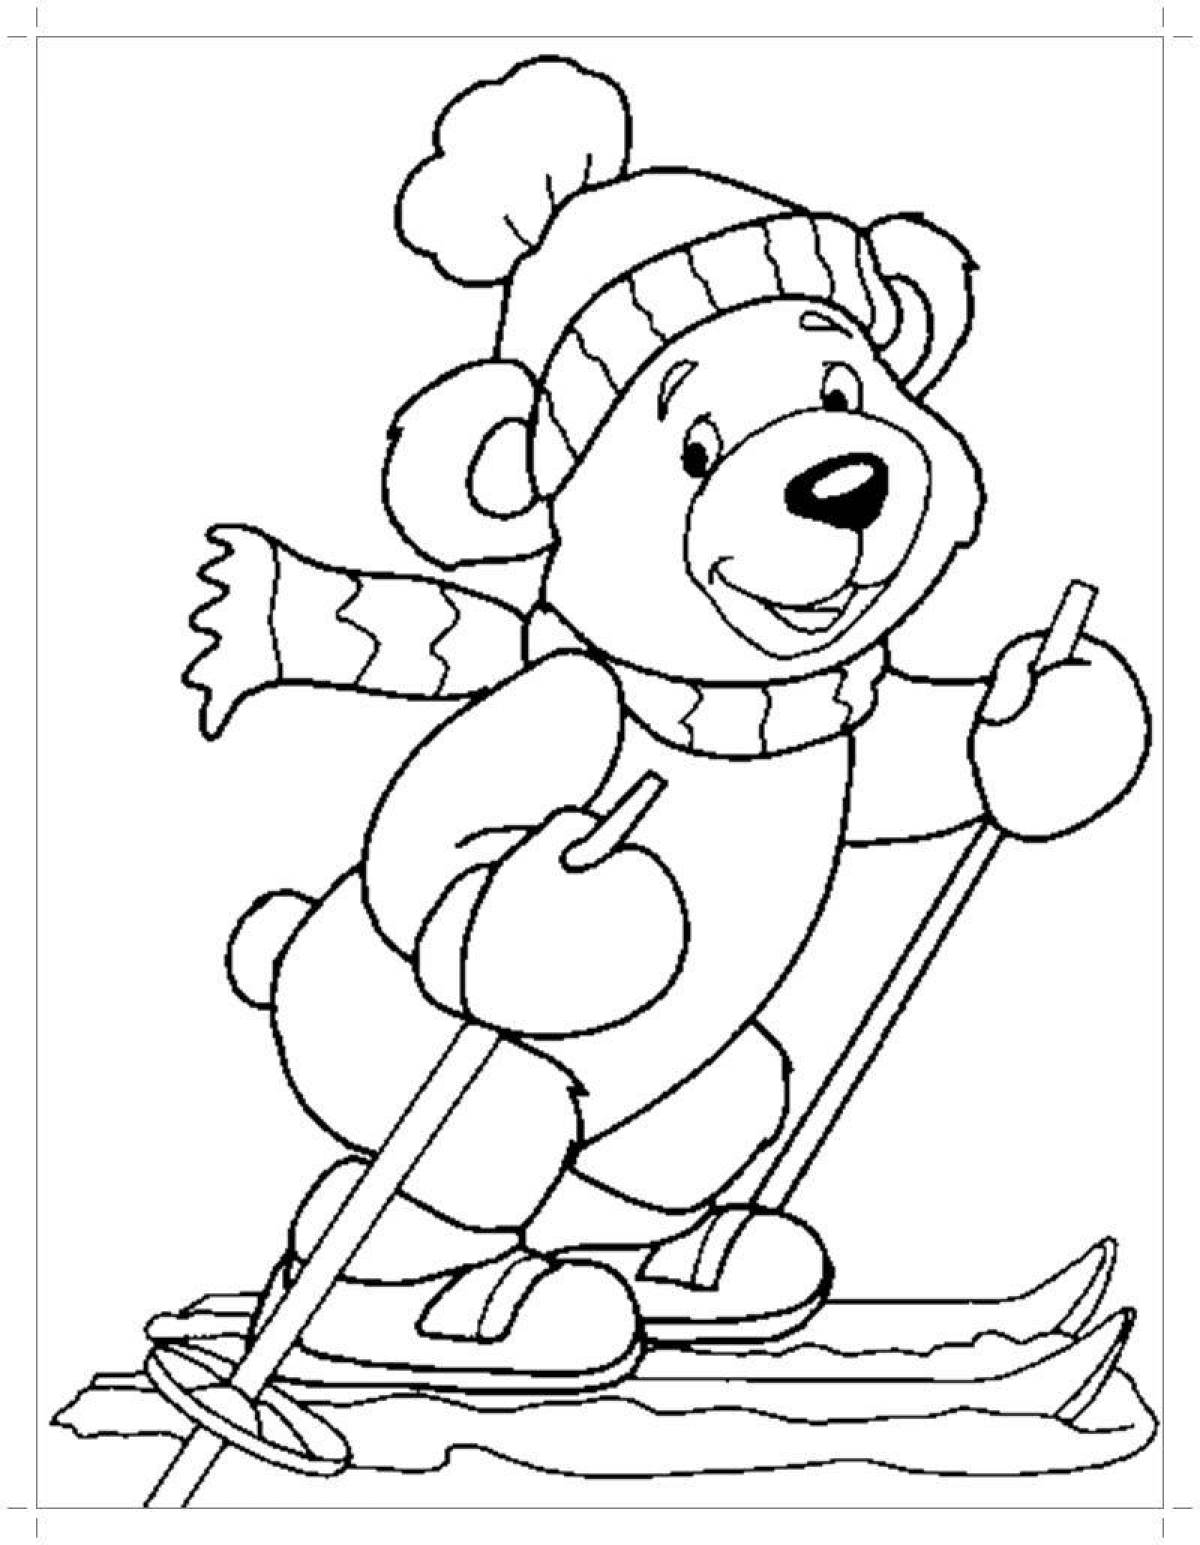 Fantastic winter coloring book for kids 2-3 years old